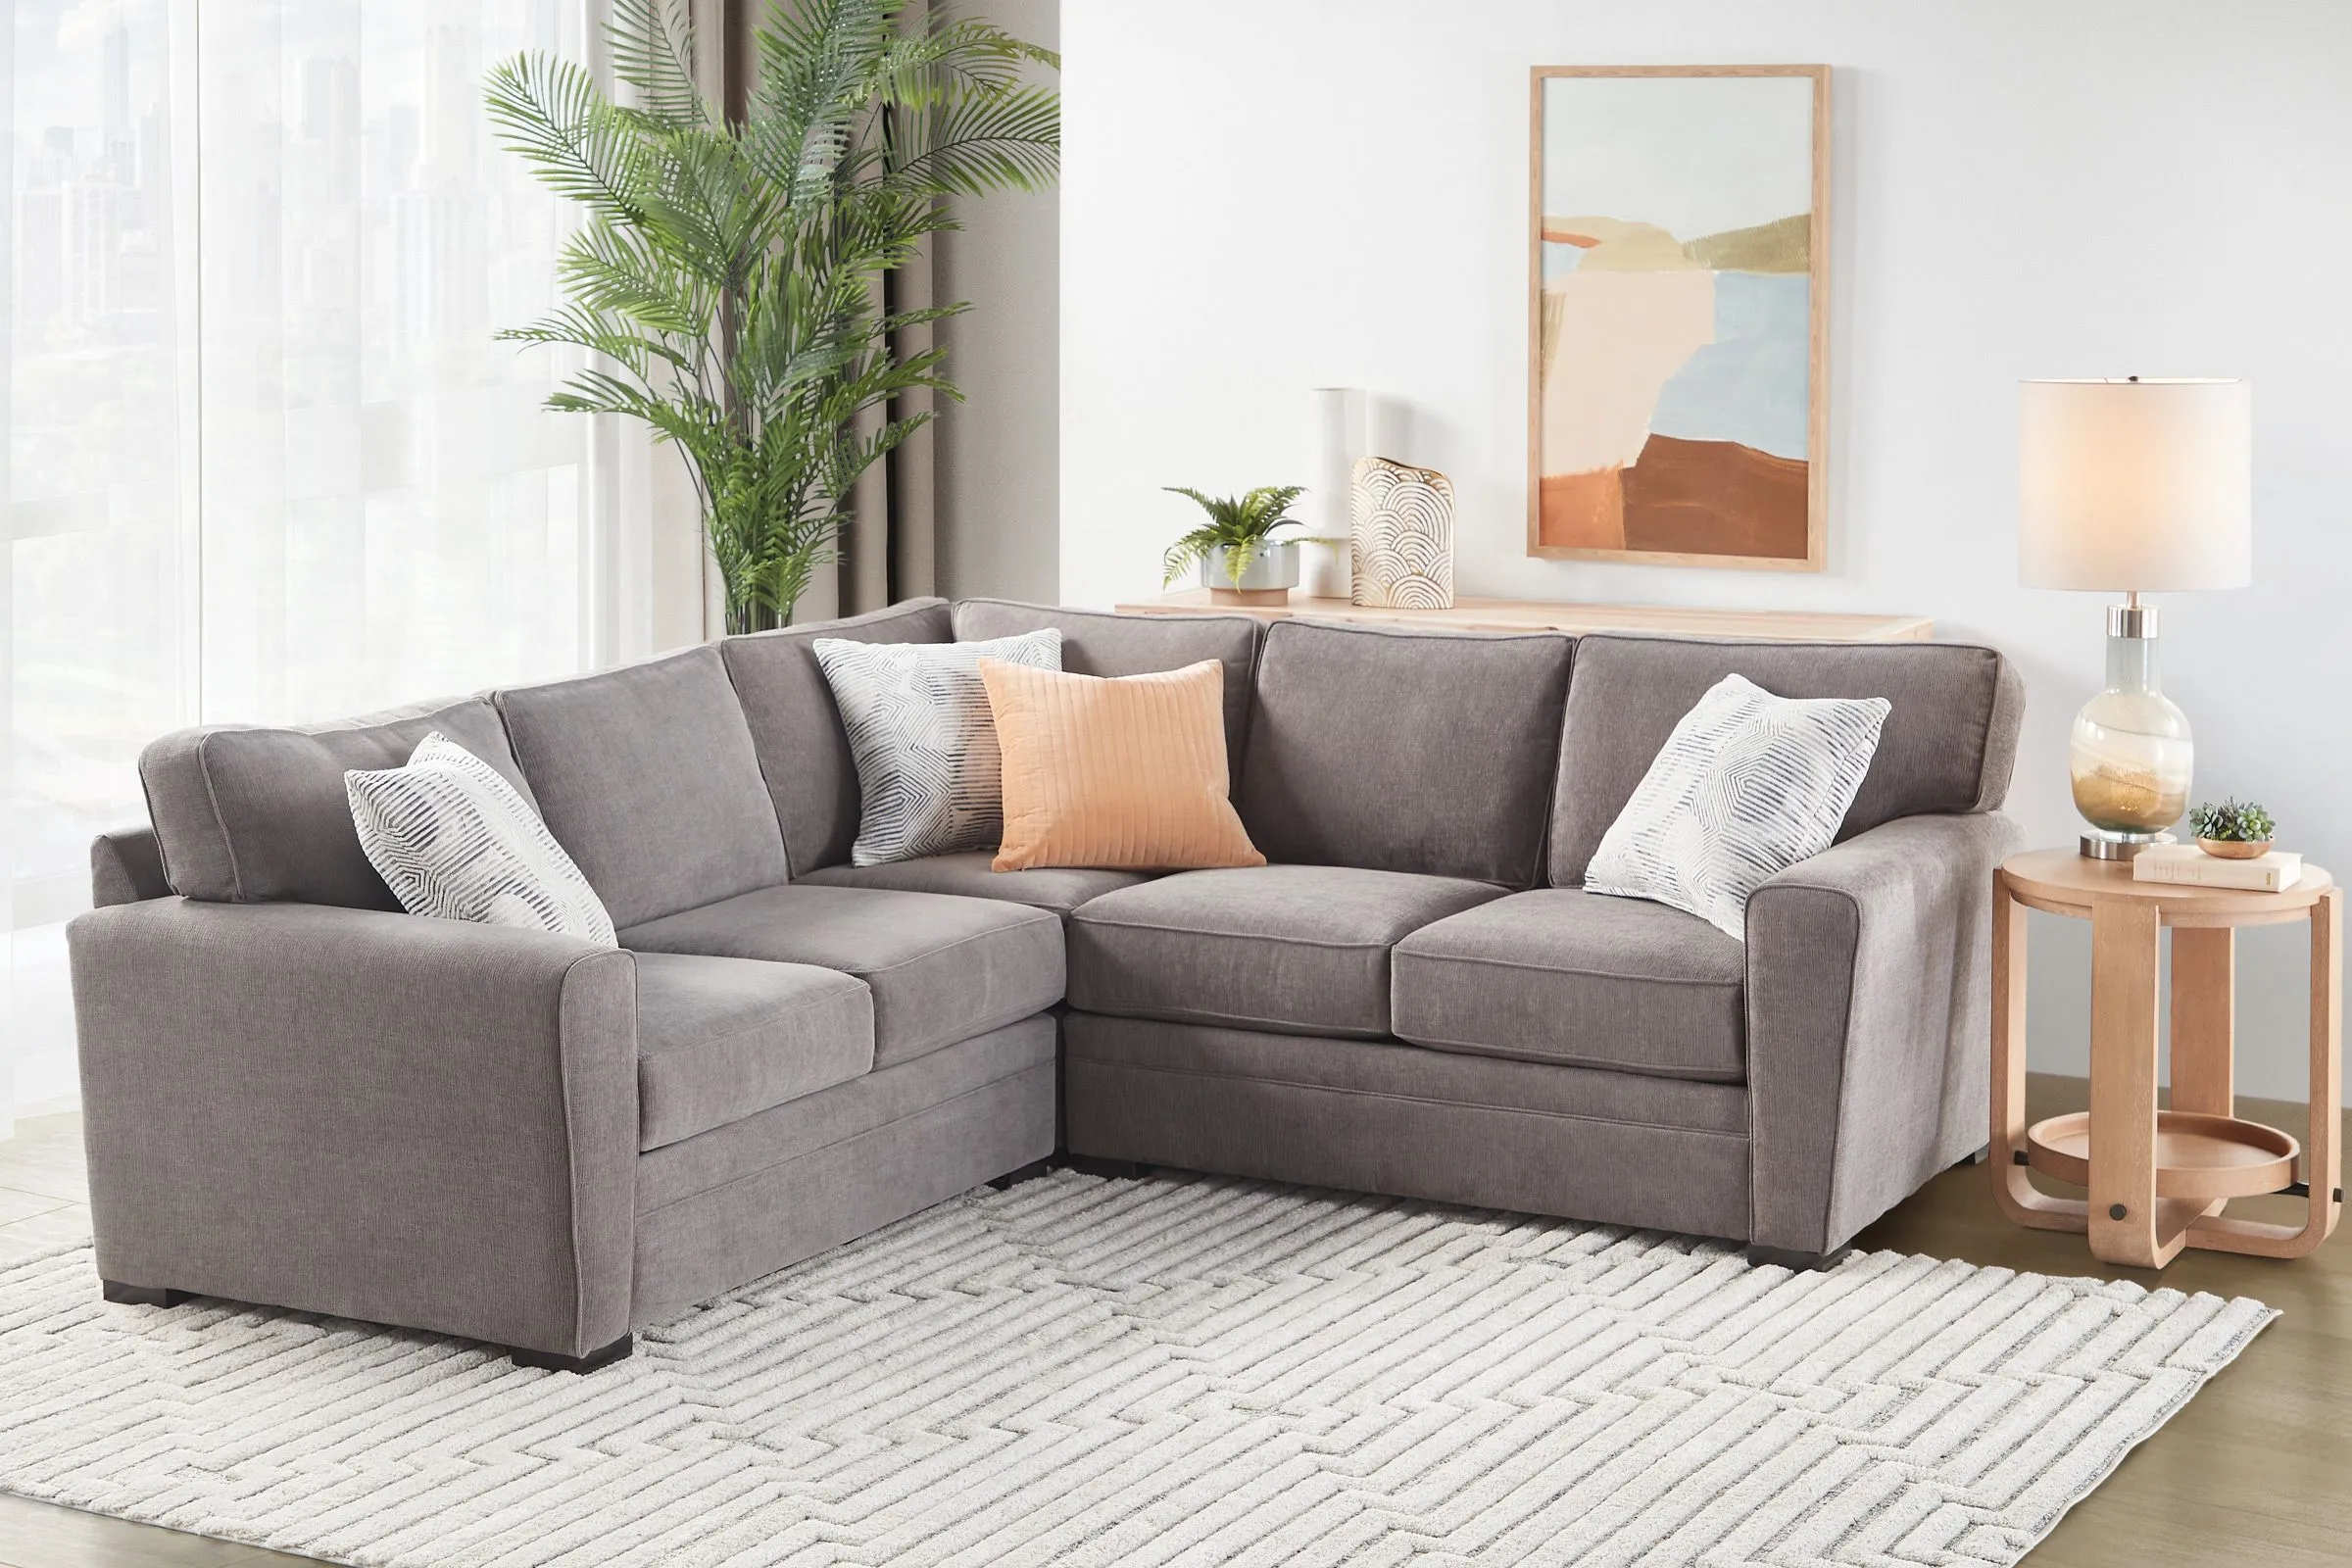 Zephyr 3-Piece Corner Sectional by Jonathan Louis